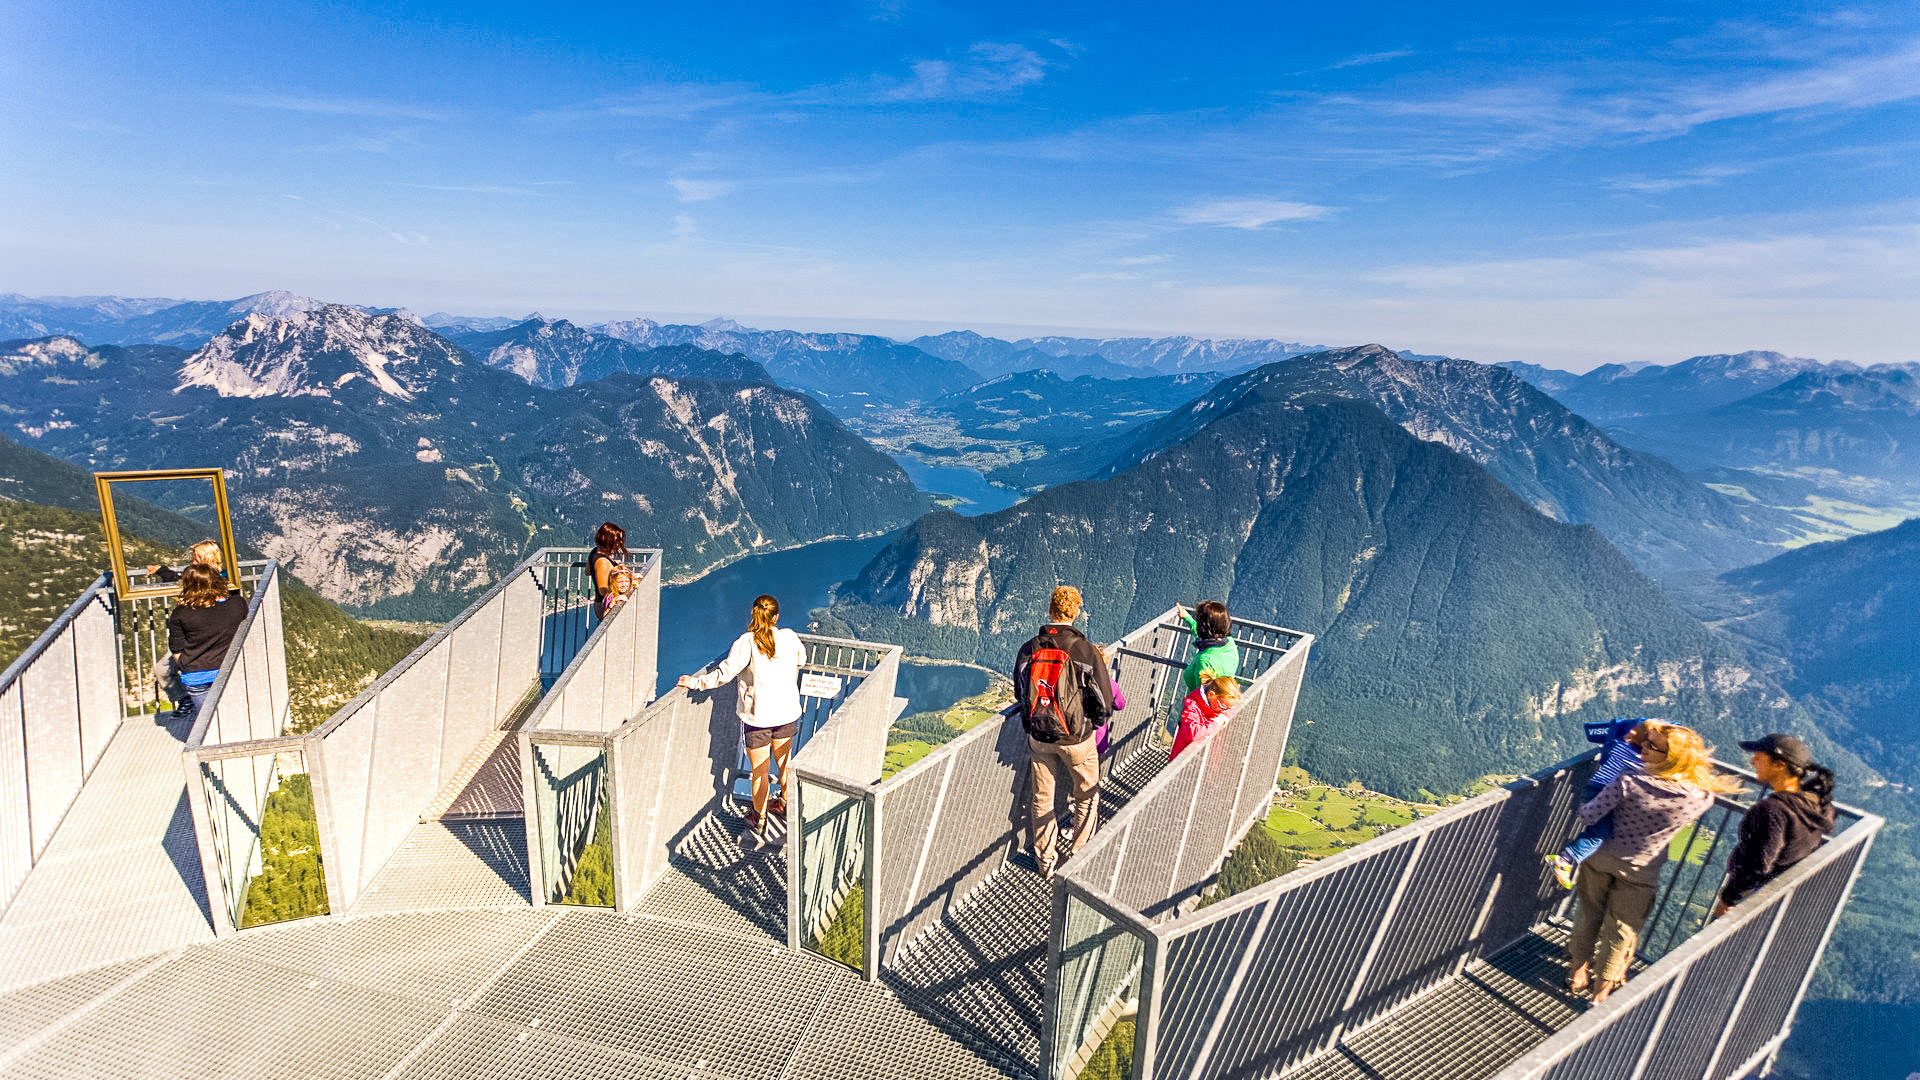 The 5 fingers, panoramic platform of the Dachstein Massif - a week in Austria itinerary